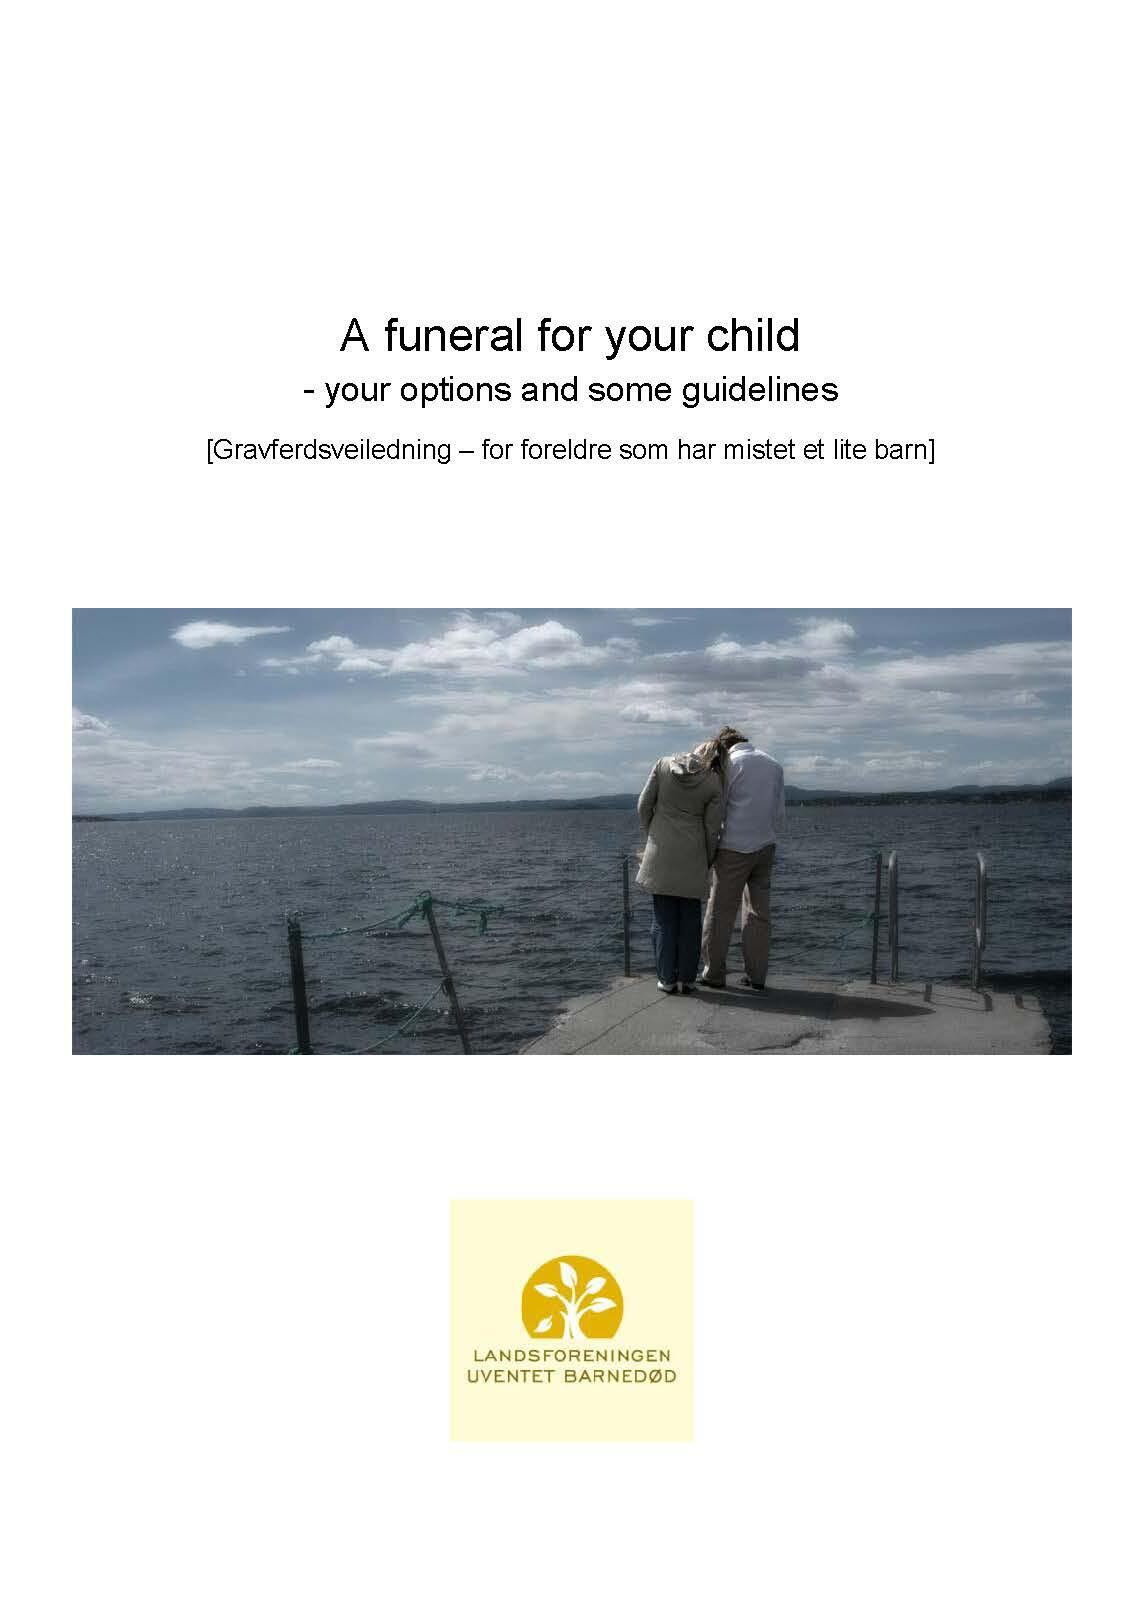 Frontpage booklet "A funeral for your child"